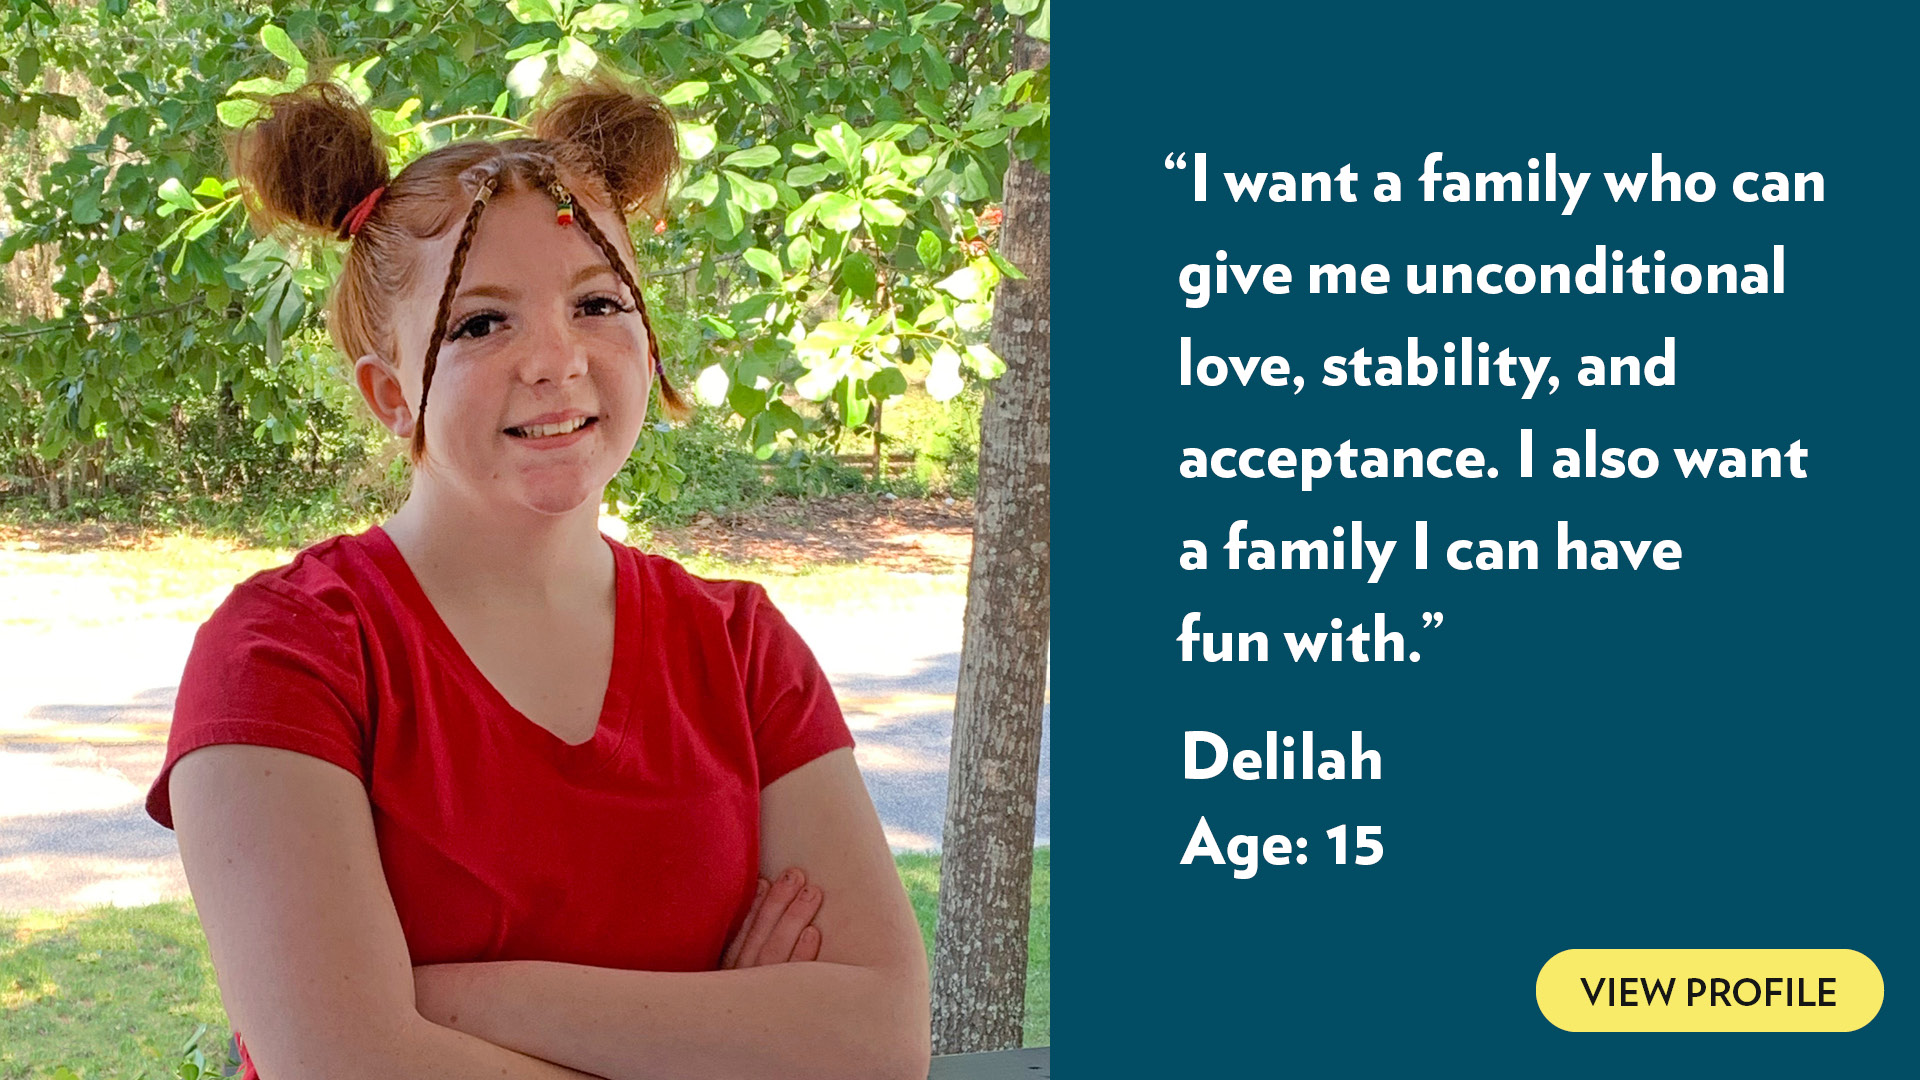 I want a family who can give me unconditional love, stability, and acceptance. I also want a family I can have fun with. Delilah, age 15. View profile.